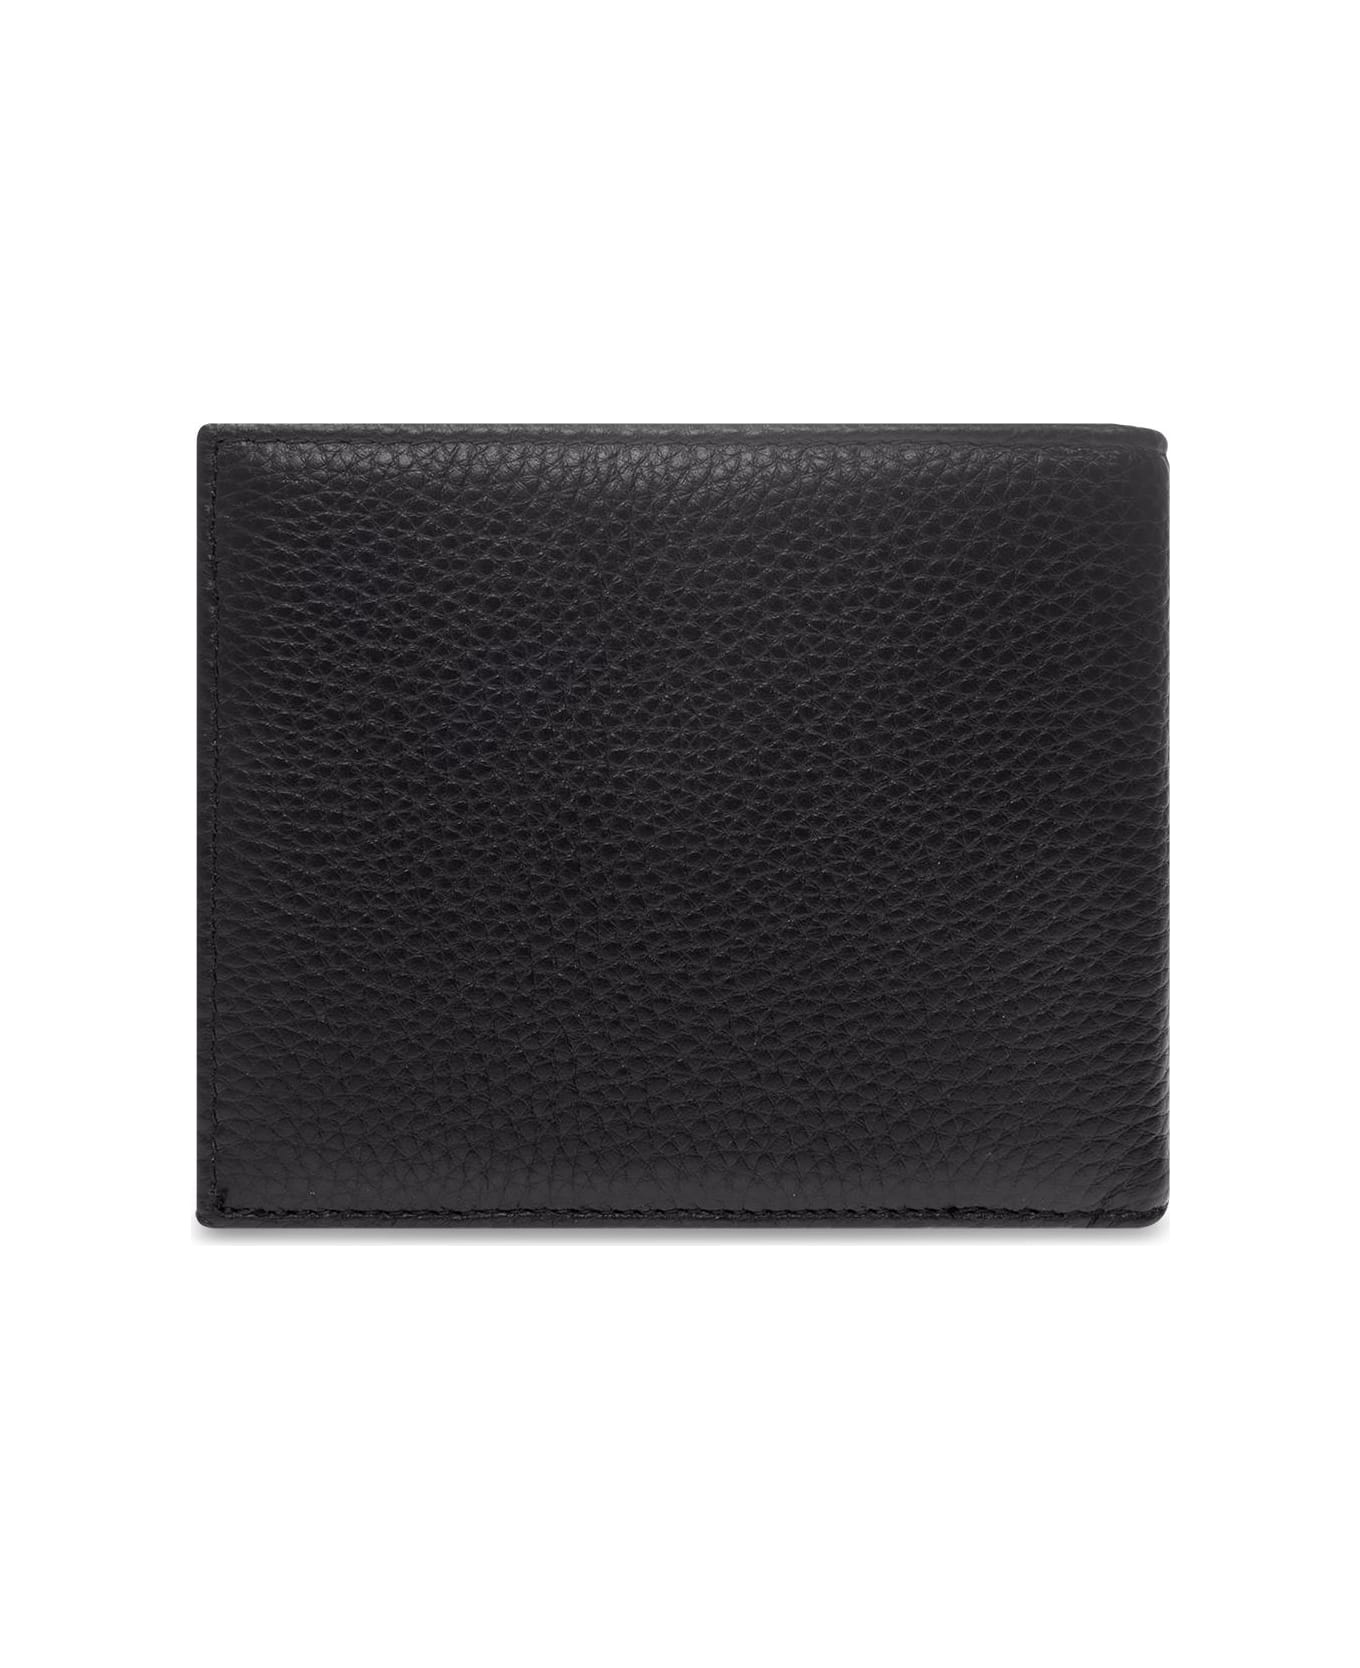 Versace Jeans Couture Wallet - BLACK/SILVER